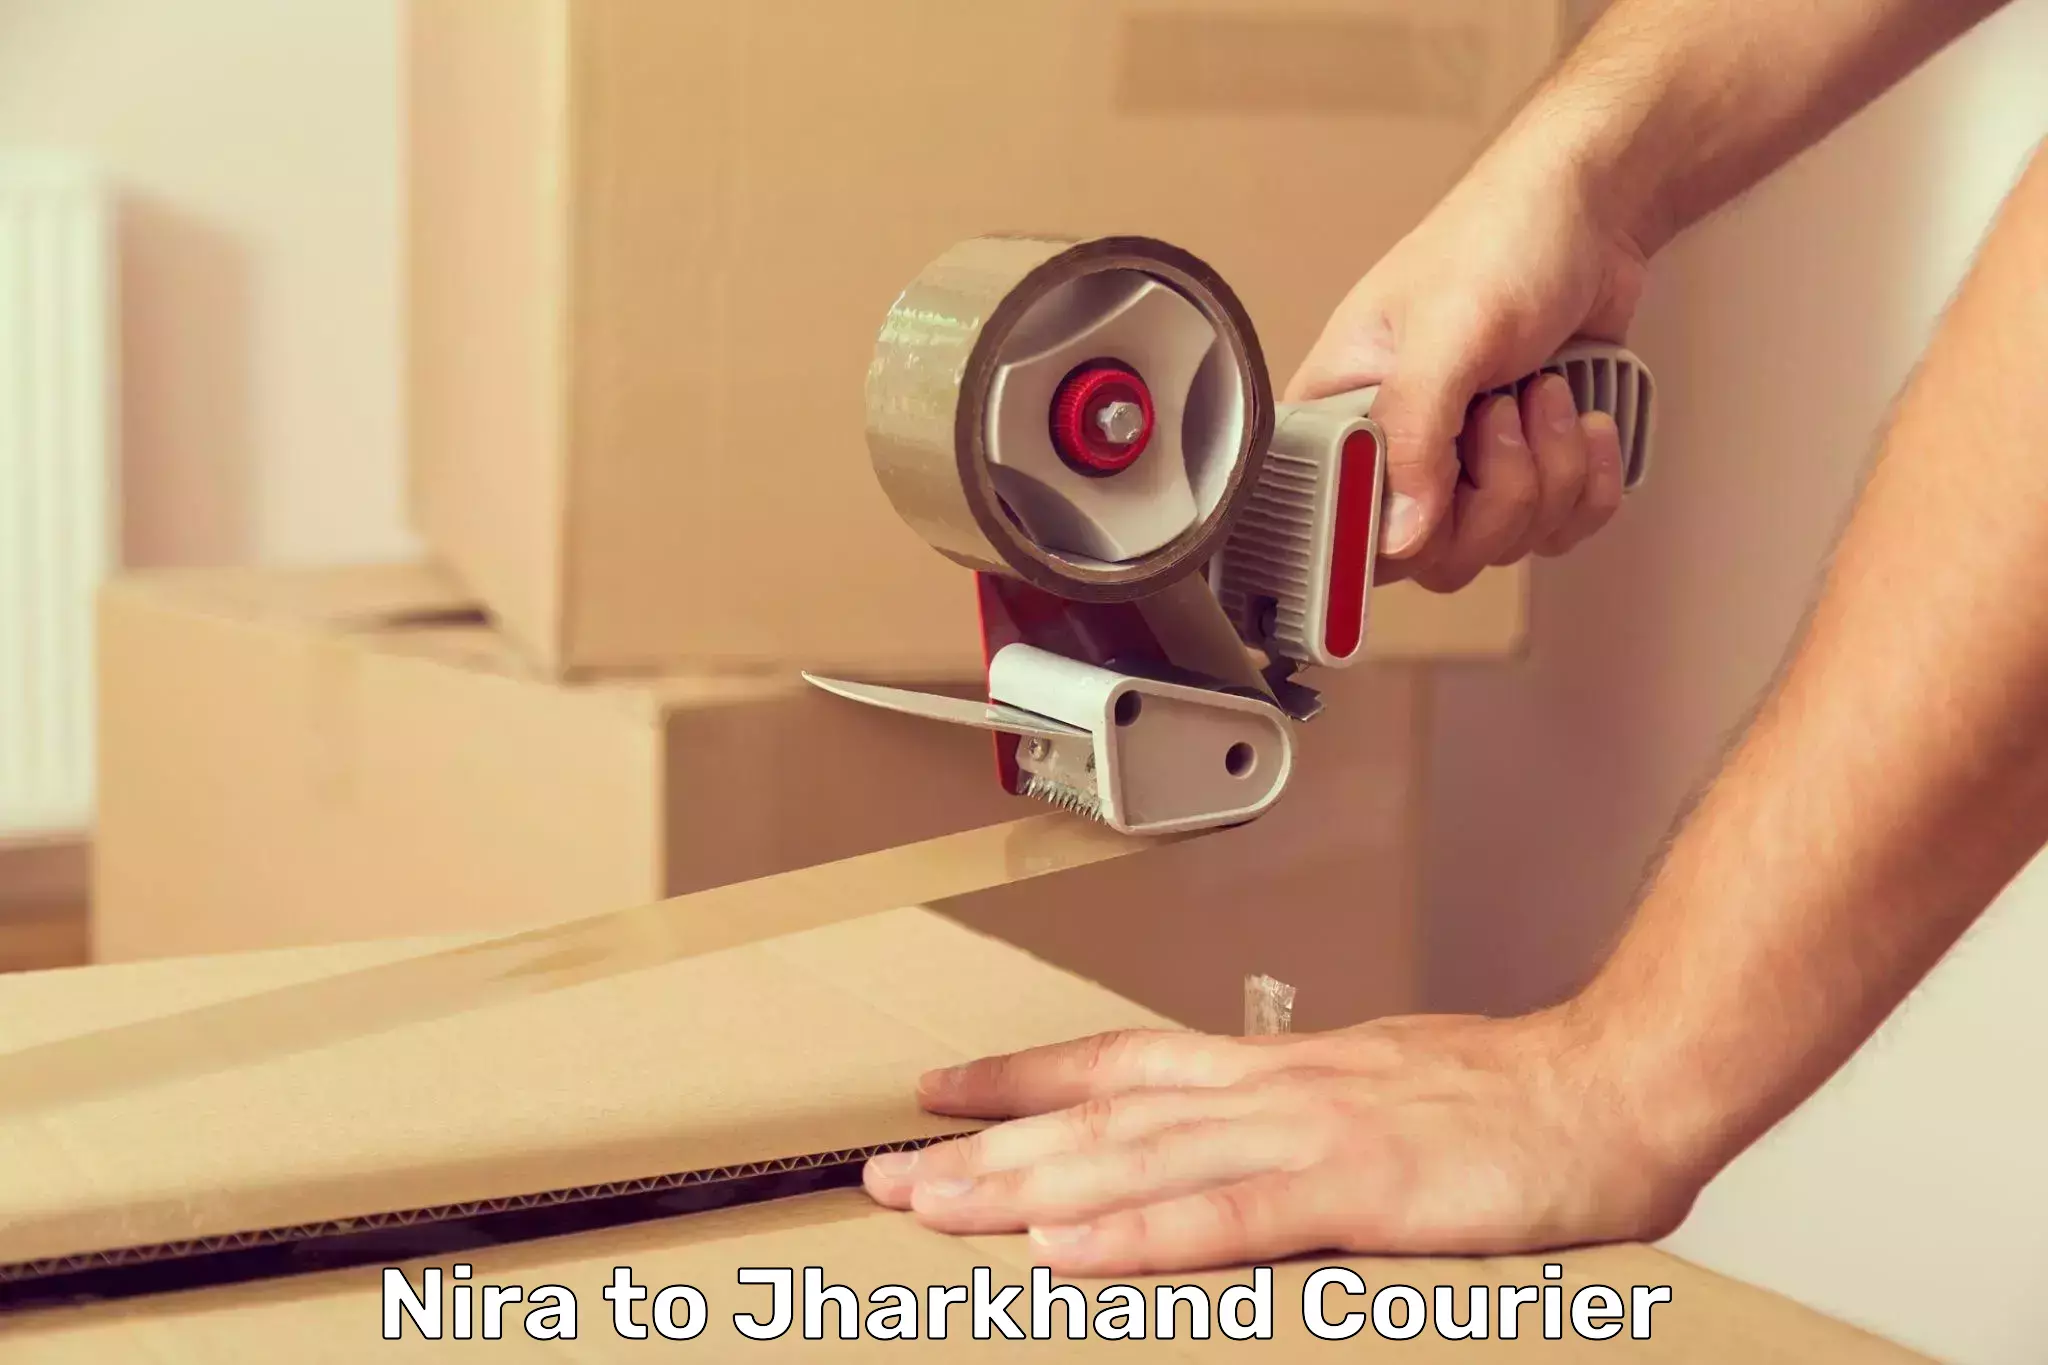 Parcel service for businesses Nira to Jharkhand